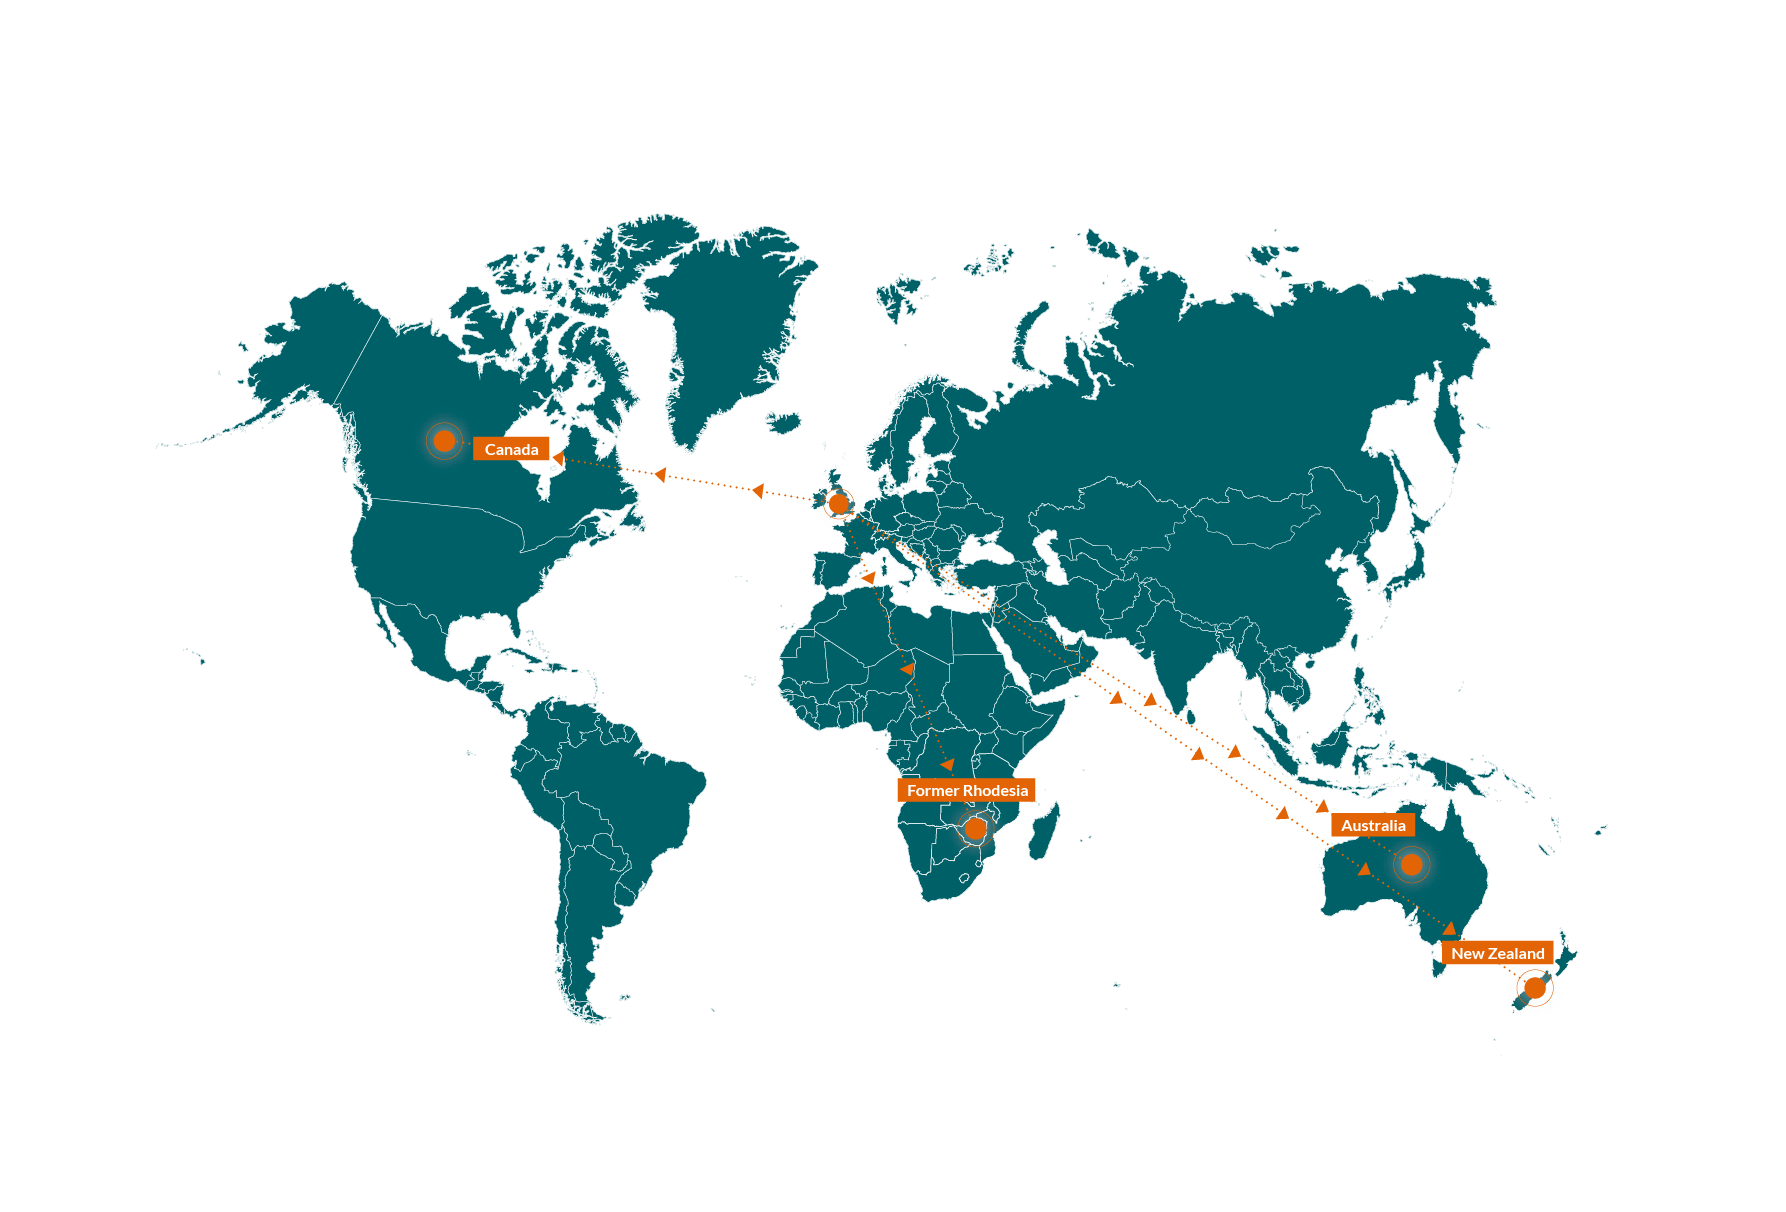 World map showing the destination countries of child migration programmes from the UK to Canada, Former Rhodesia, Australia and New Zealand